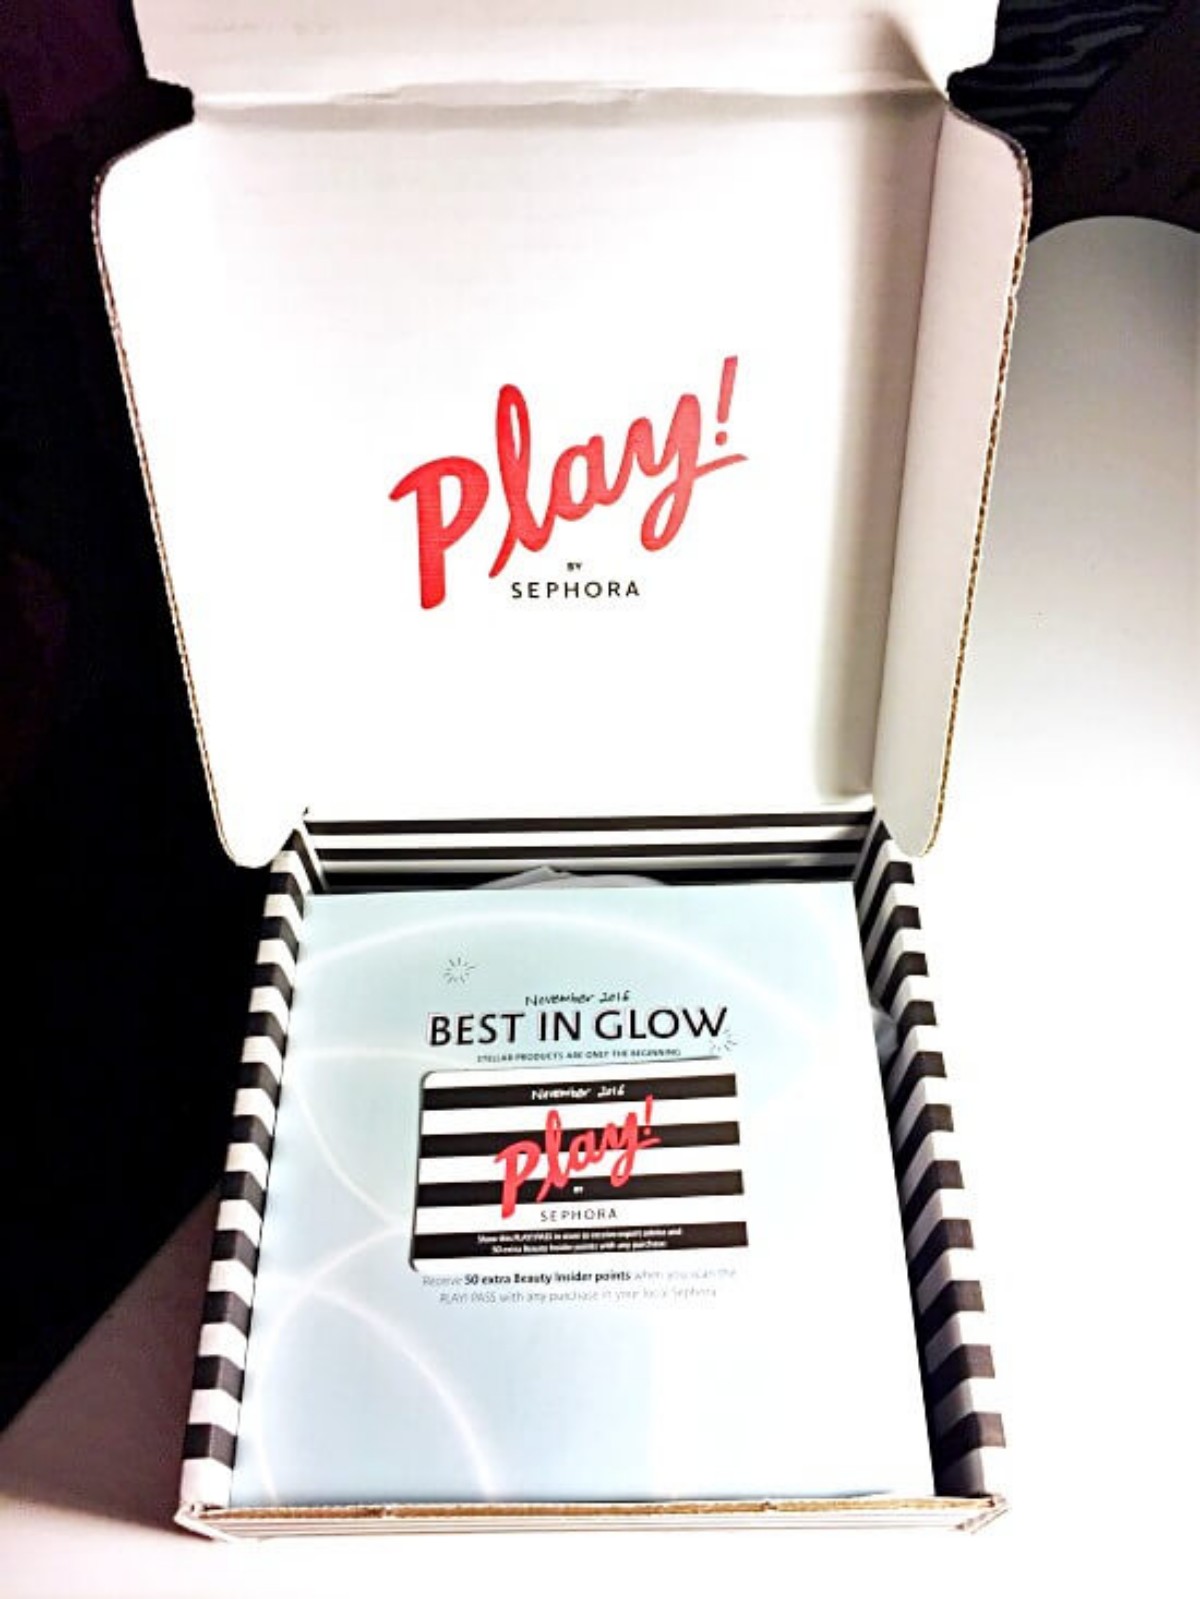 Play! by Sephora November 2016 review